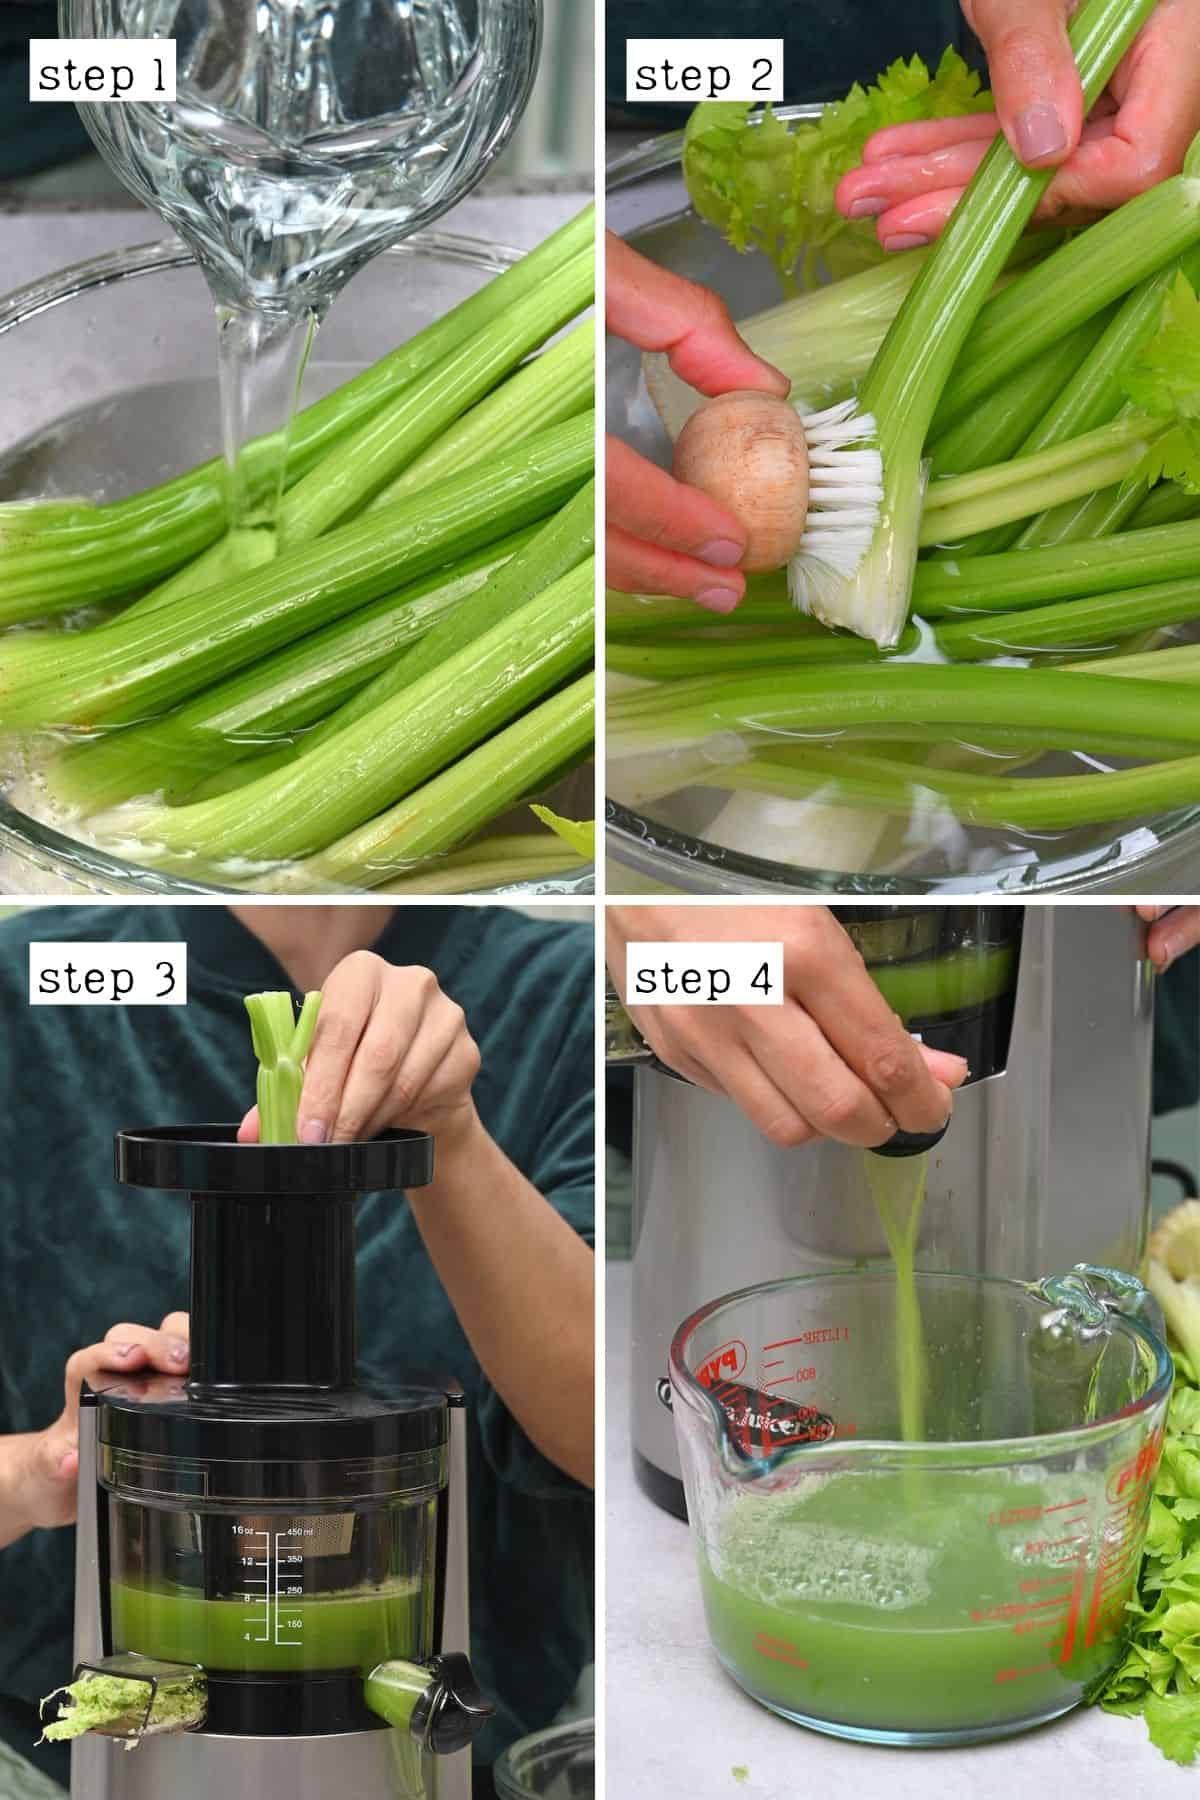 Steps for cleaning and juicing celery